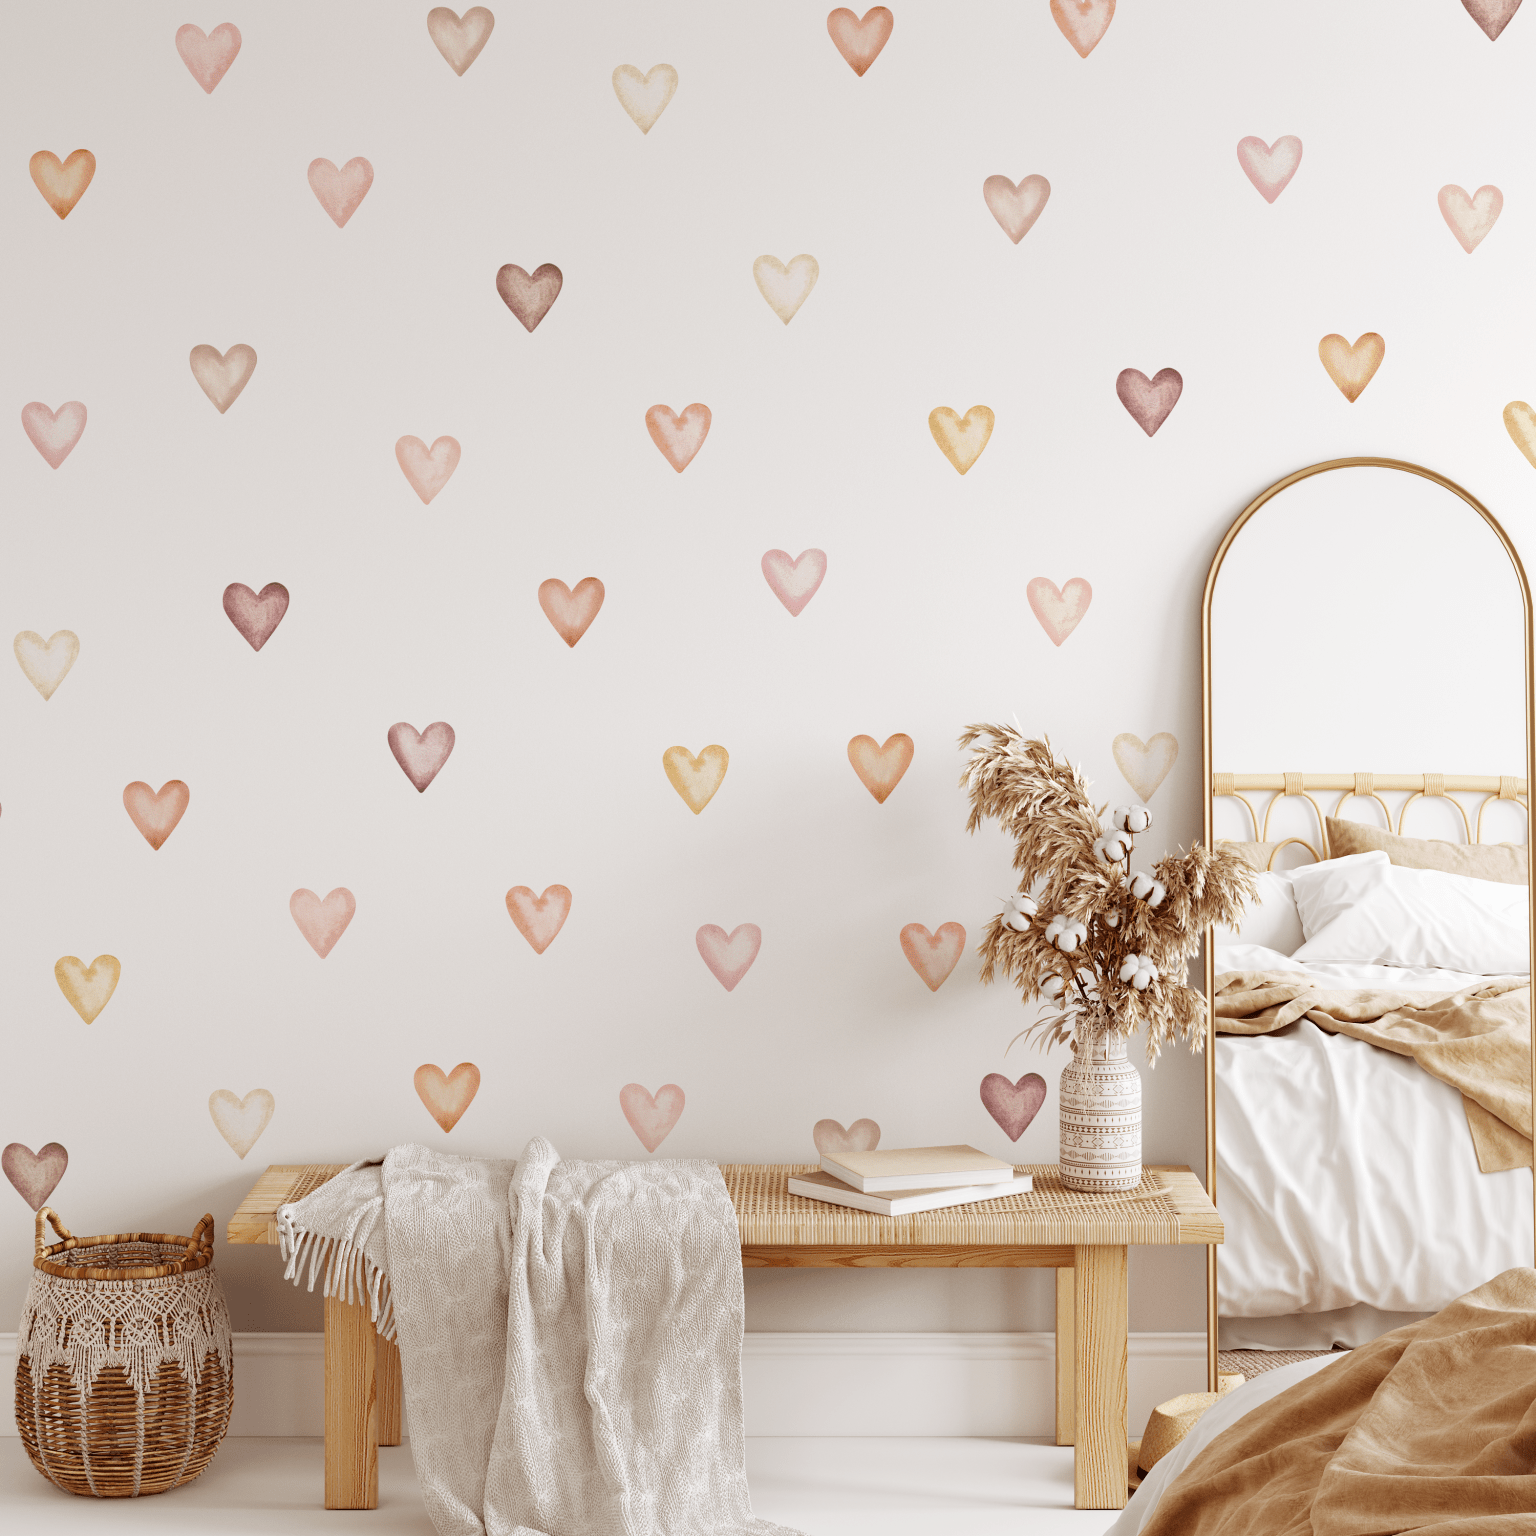 12 Best Wall Decals for Kids Rooms - Cute Watercolor Removable Wall Stickers